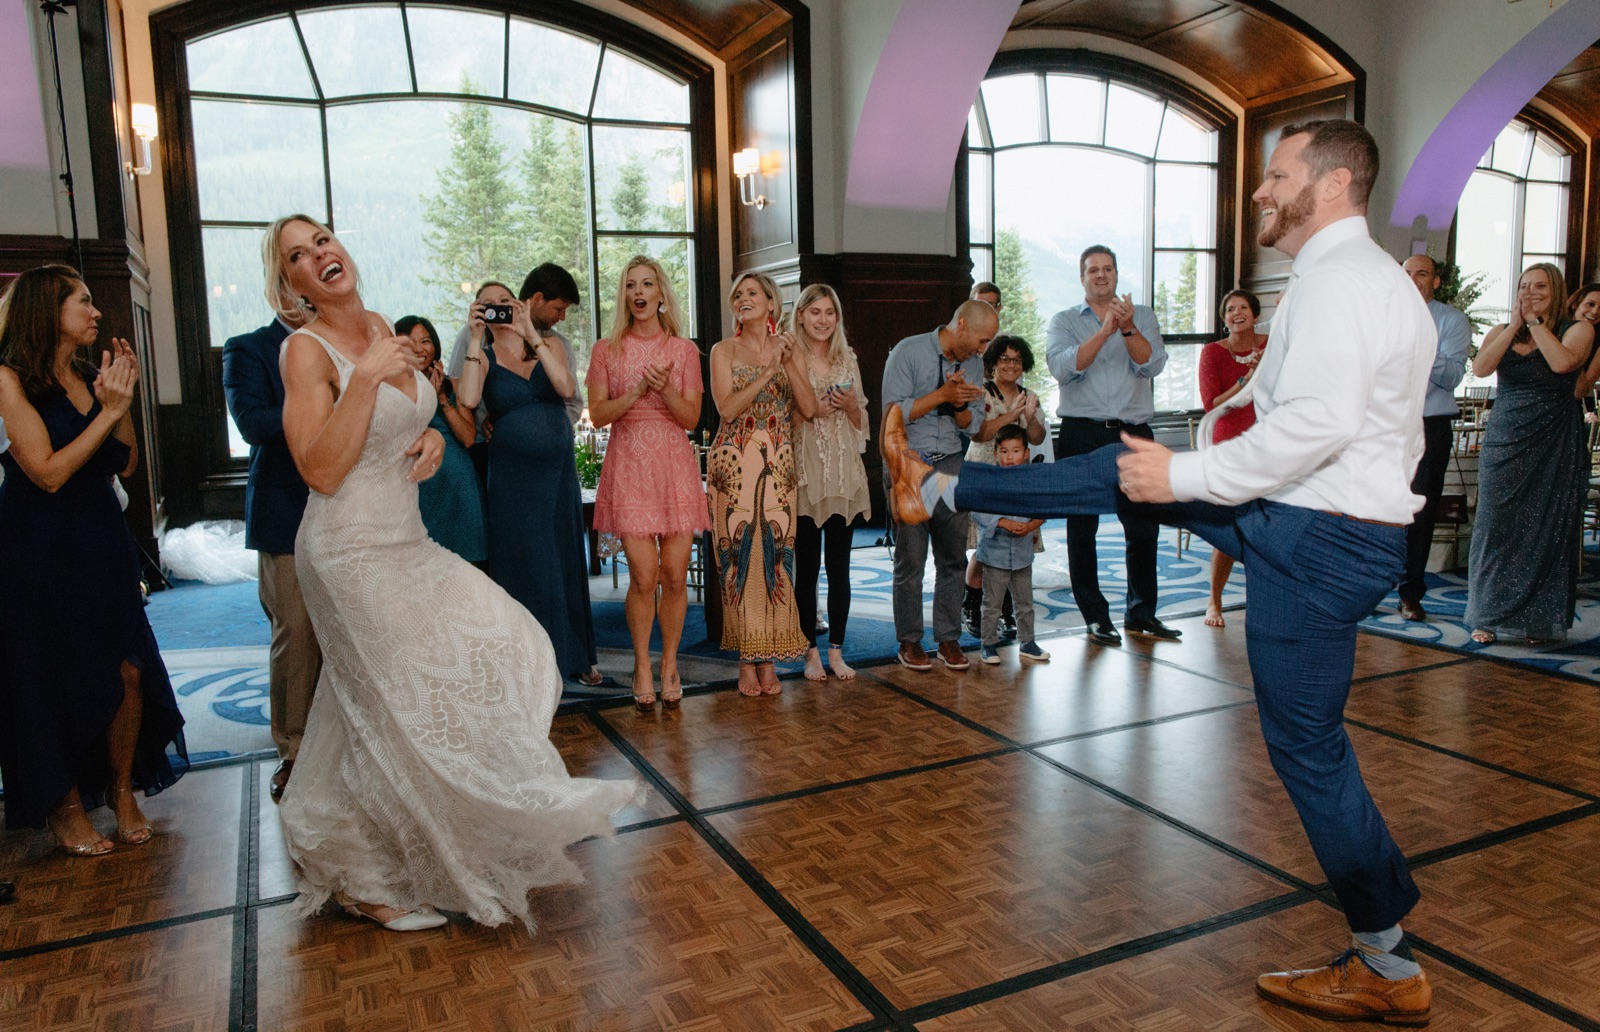 Jewish wedding tradition of dancing the hora at Chateau Lake Louise